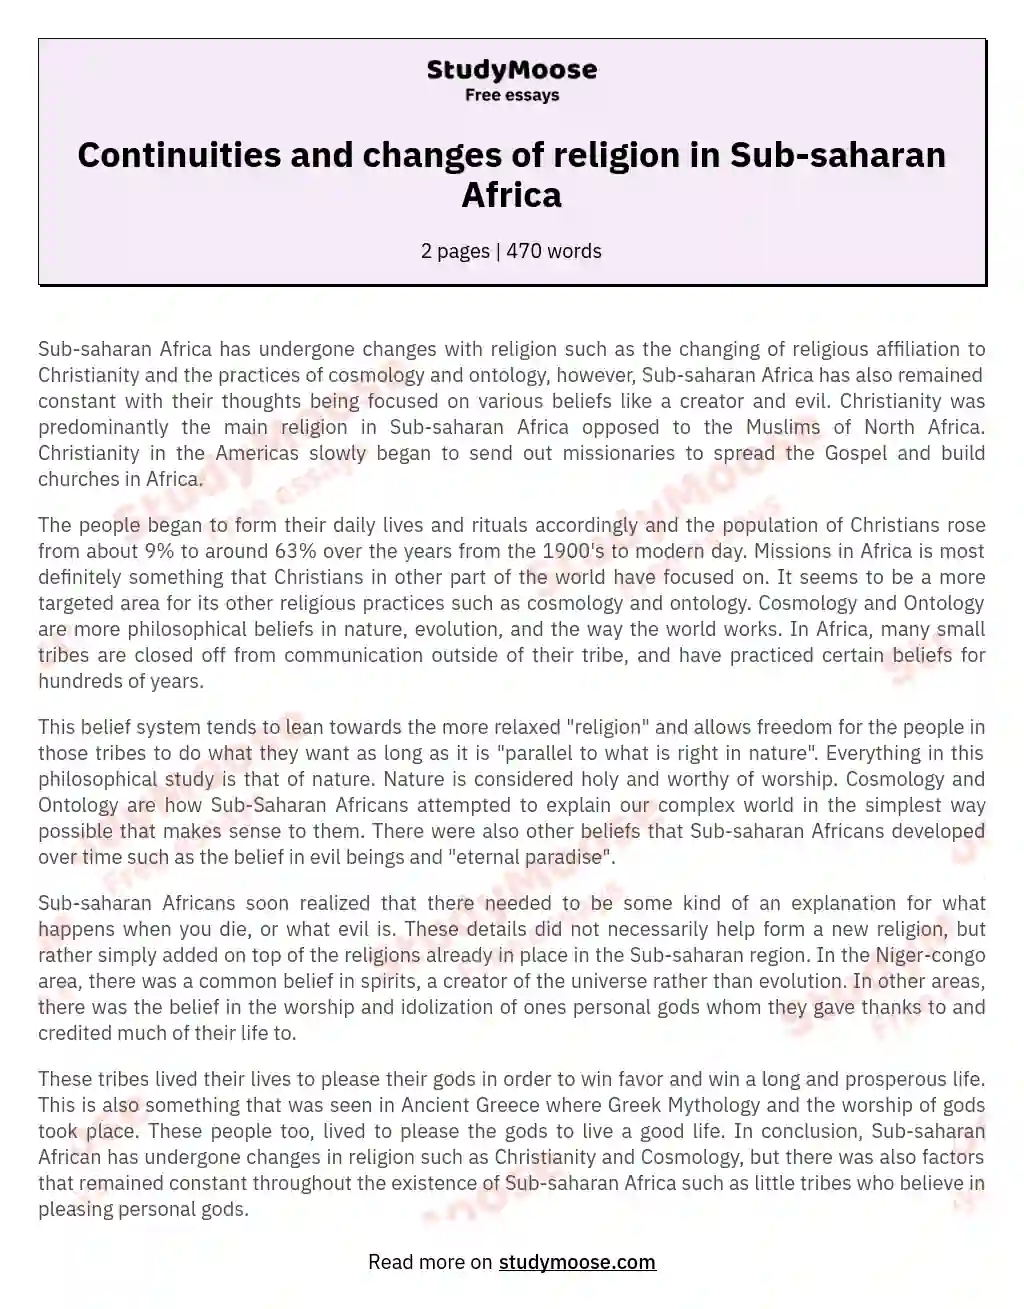 Continuities and changes of religion in Sub-saharan Africa essay